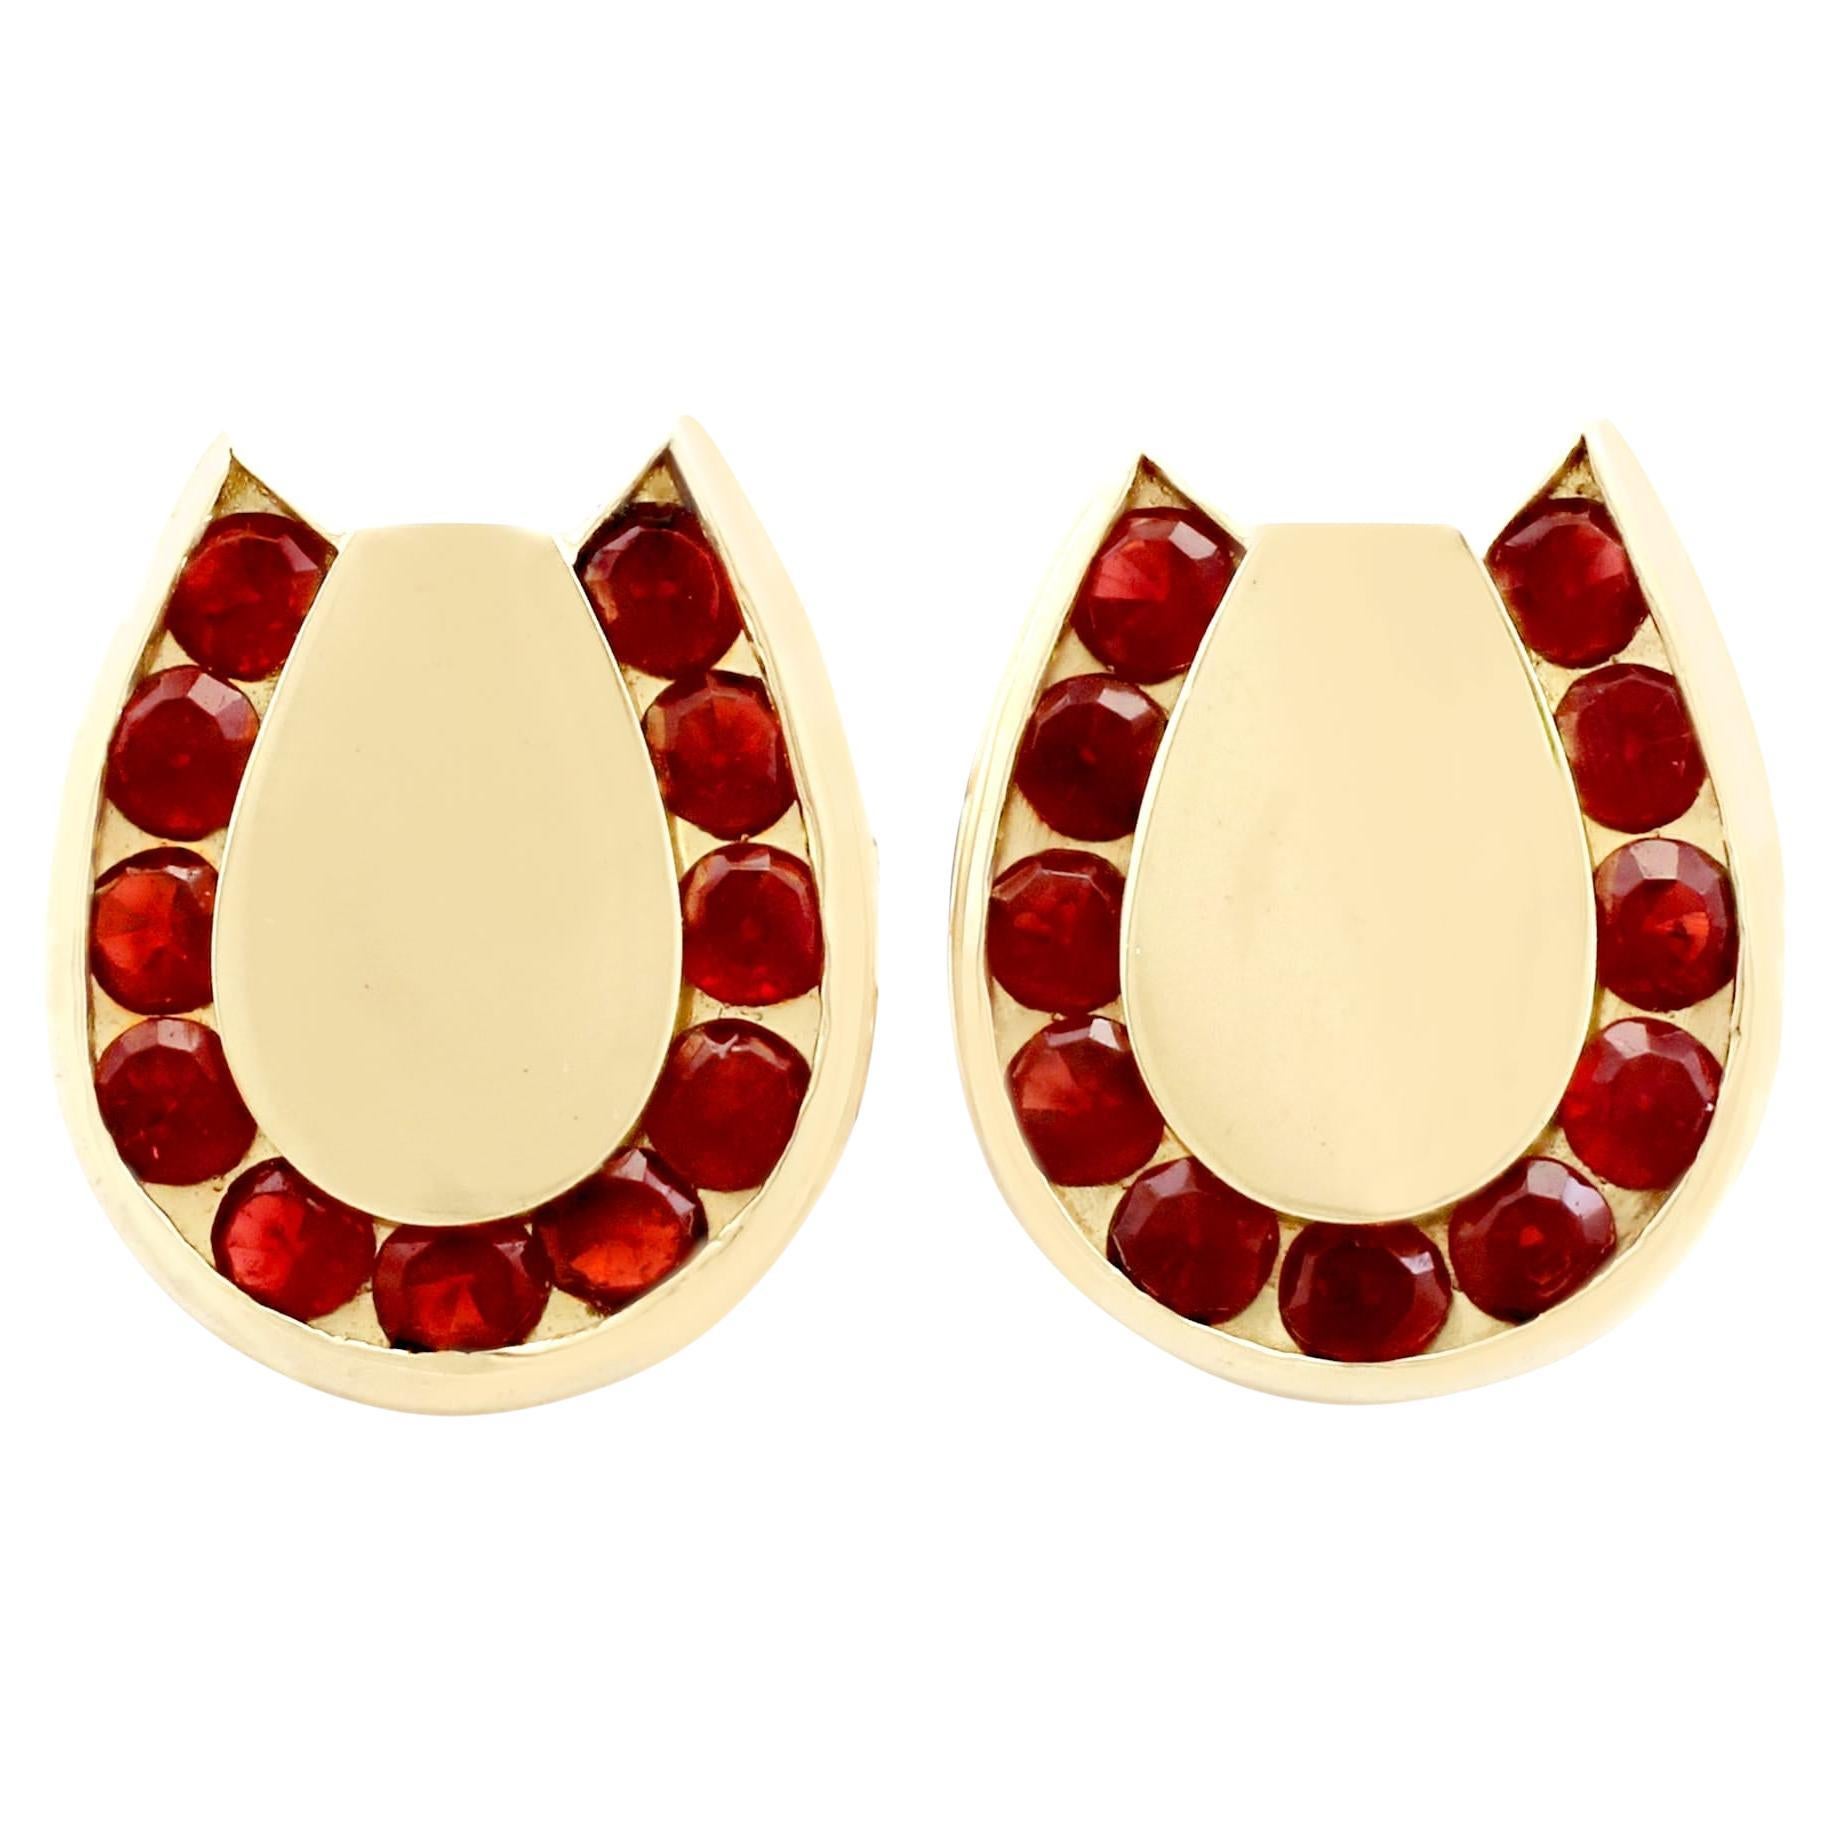 Vintage 1950s 3.82 Carat Garnet and Yellow Gold Horseshoe Cufflinks For Sale